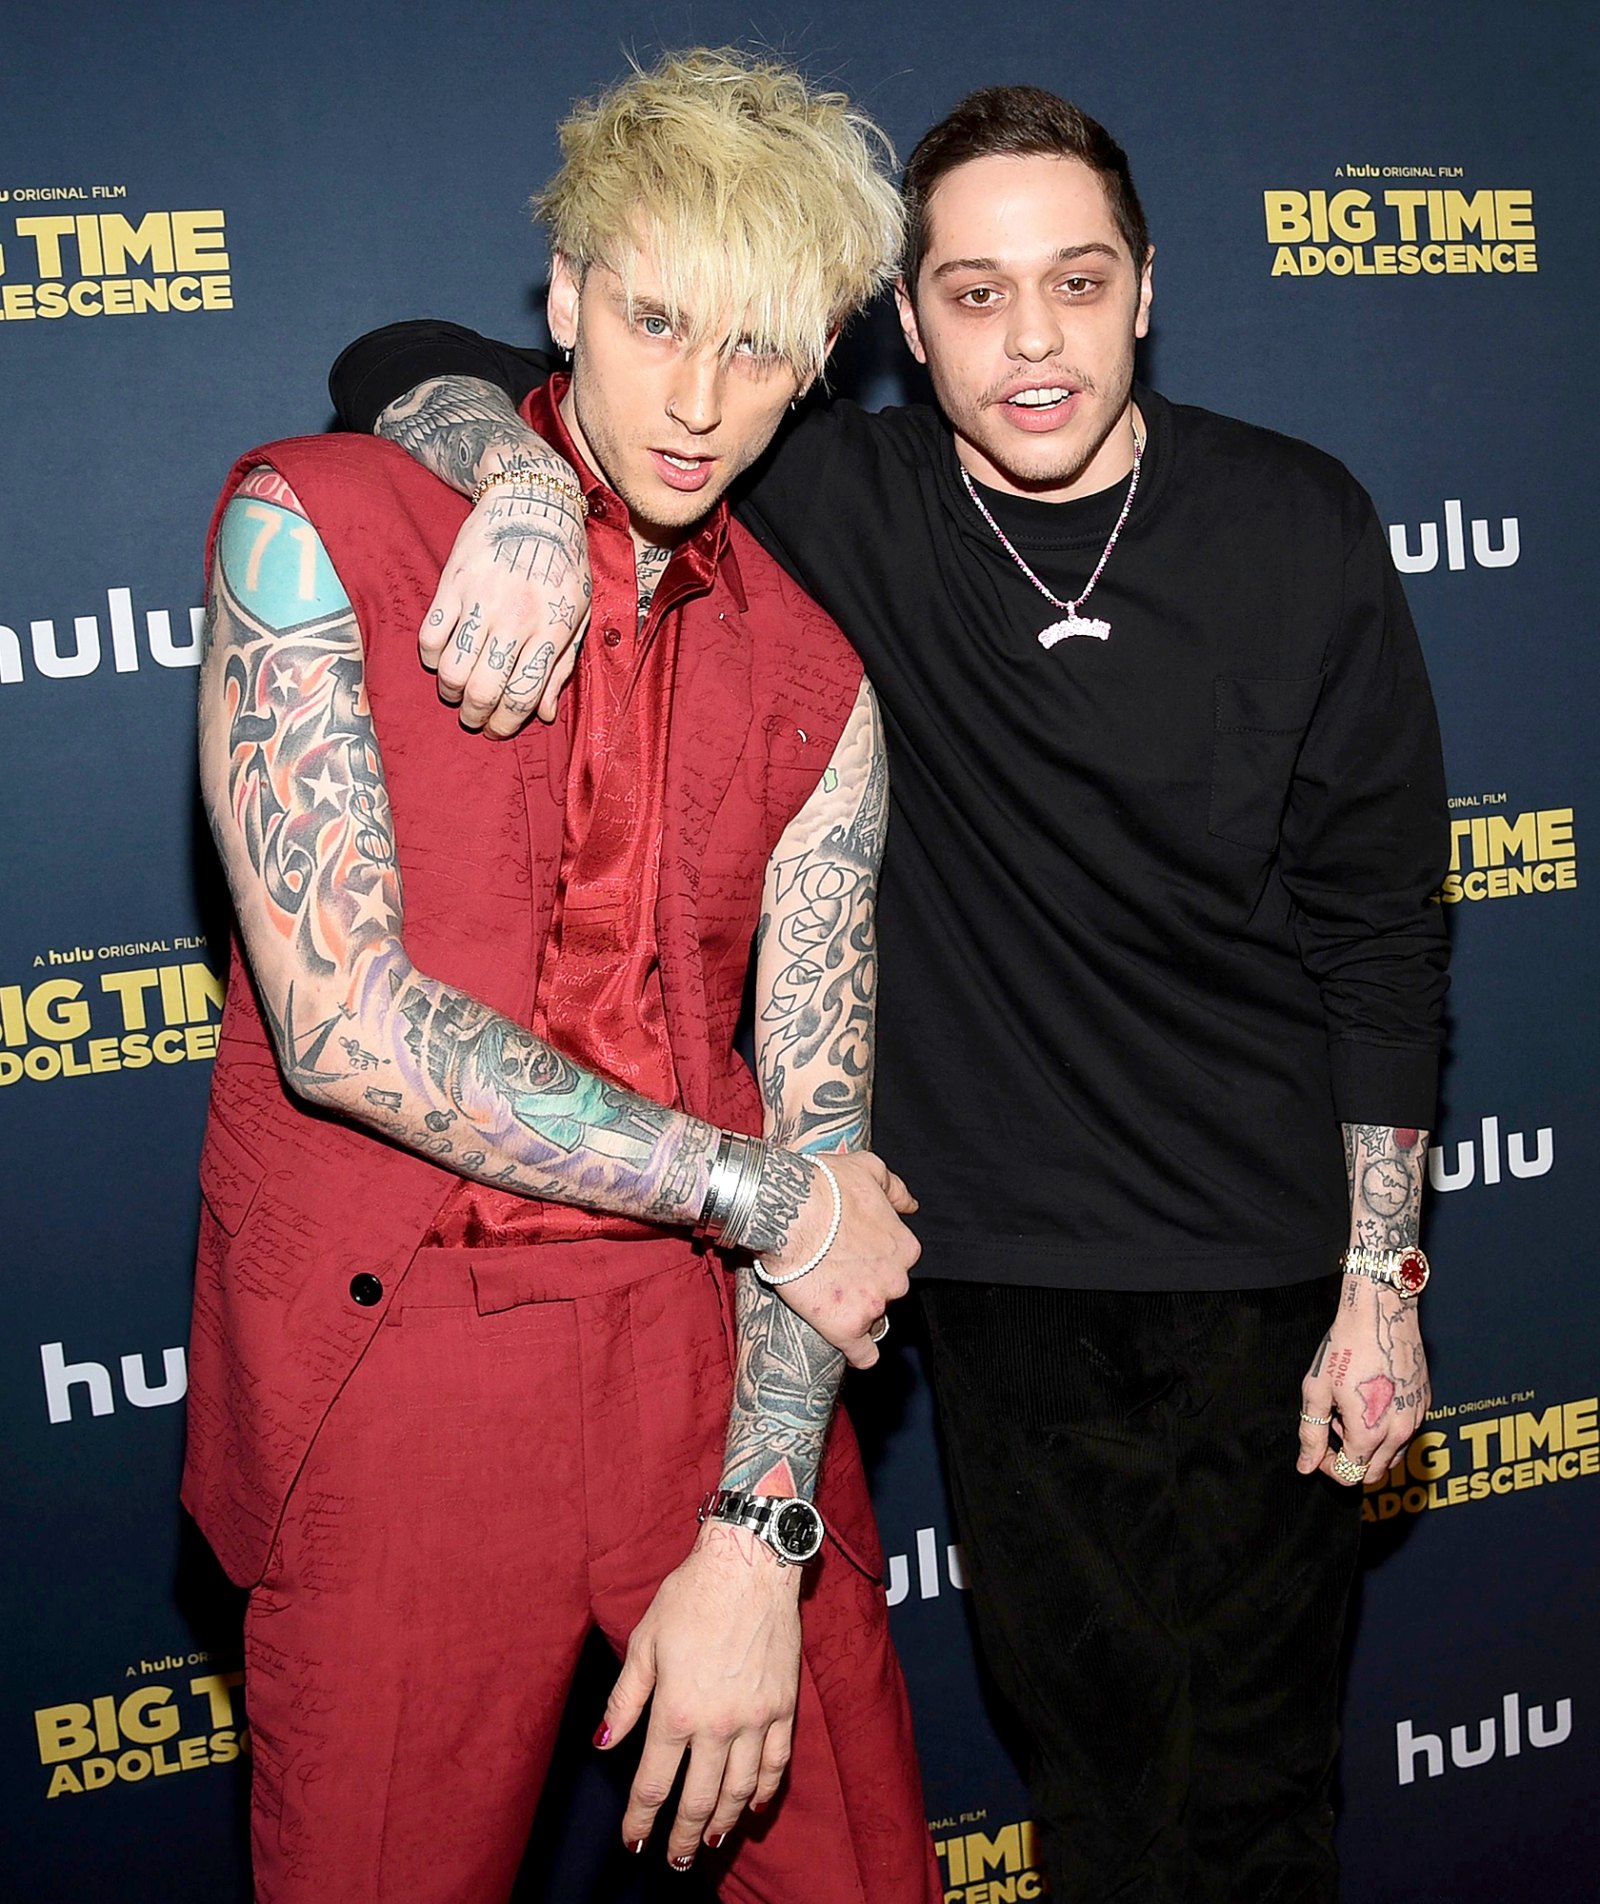 Pete-Davidson-Is-All-Smiles-During-Rare-Red-Carpet-Appearance